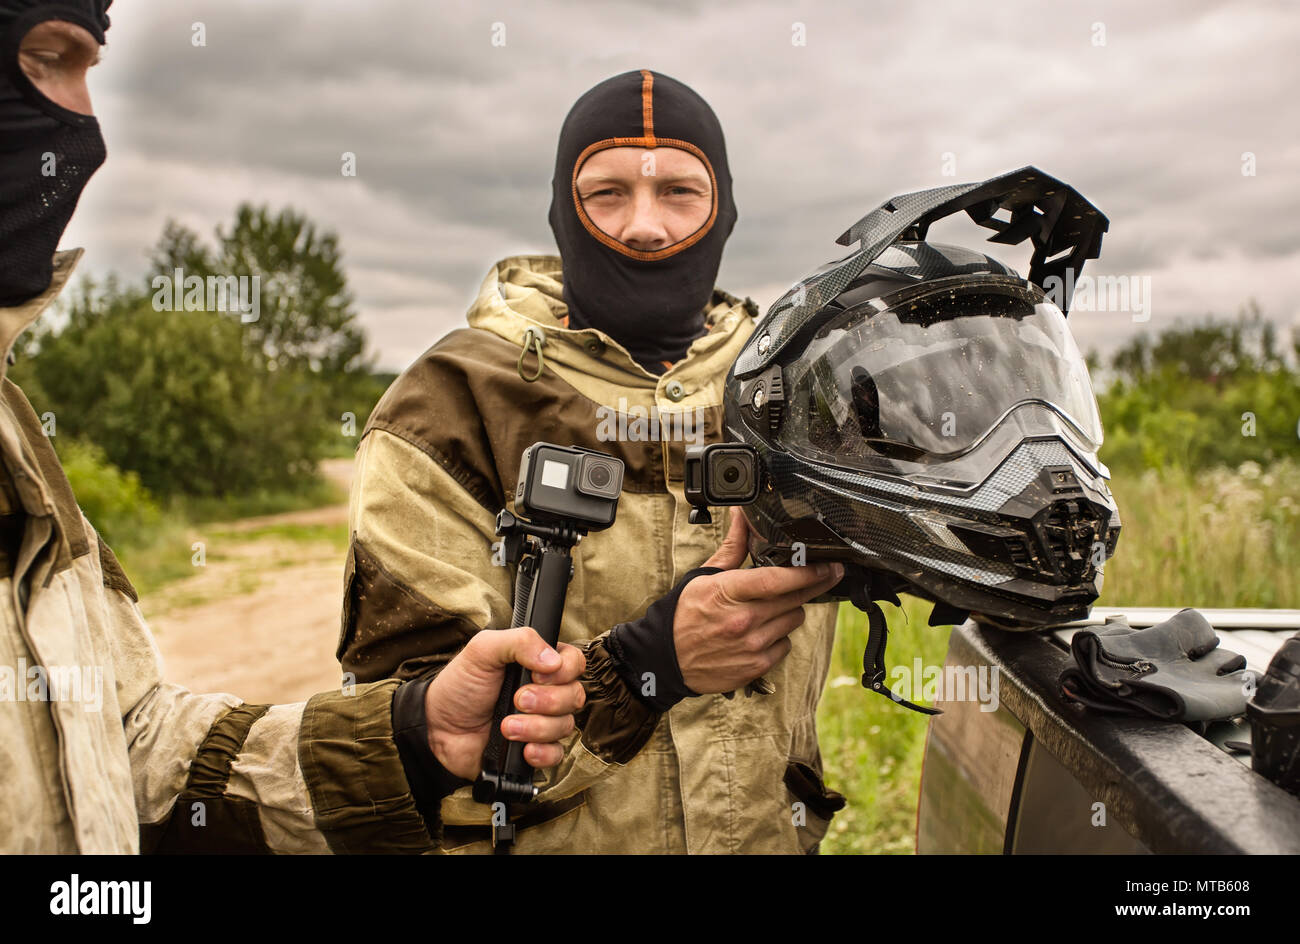 Close up of Two men outdoors wearing balaclava helmets and motor Stock Photo